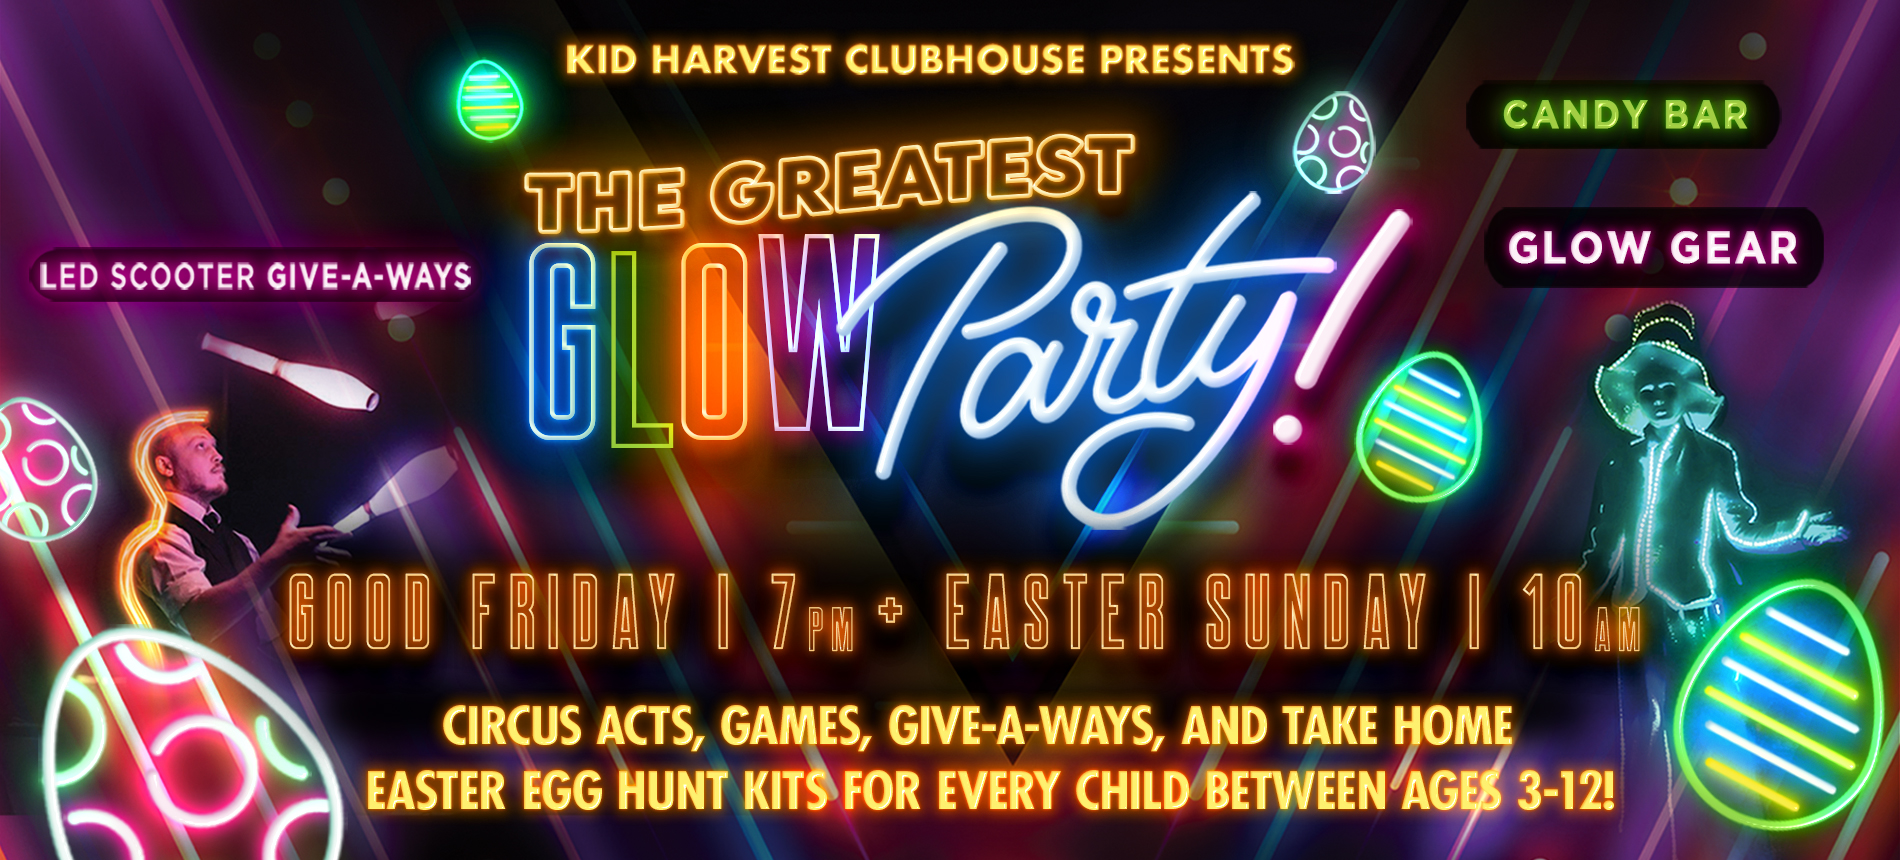 Kid Harvest Clubhouse Presents the Greatest Glowparty! Good Friday 7pm + Easter Sunday 10am Circus Acts, Games, Give-a-ways, and Take Home Easter Egg Hunt Kits for Every Child Between Ages 3-12! Led Scooter Give-a-ways Cany Bar Glow Gear